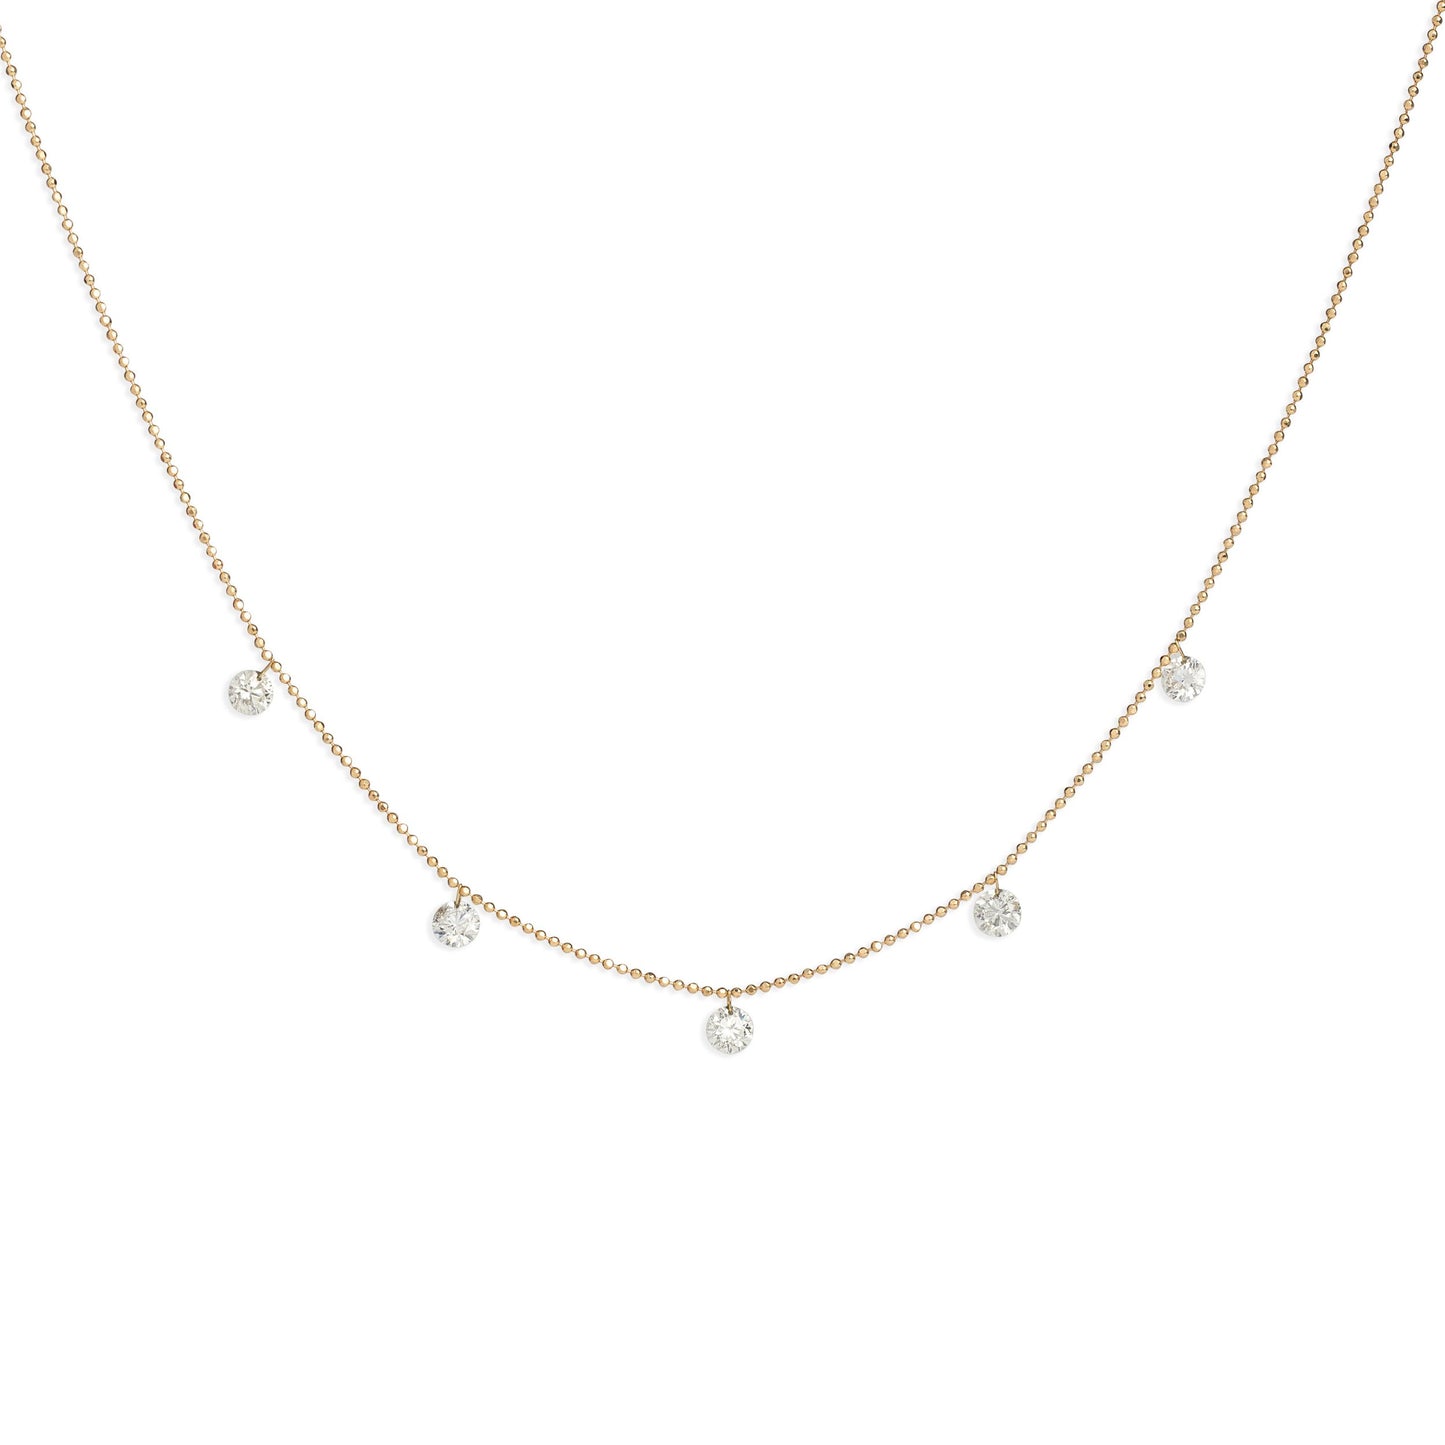 1.0 CT Five Floating Diamond Necklace